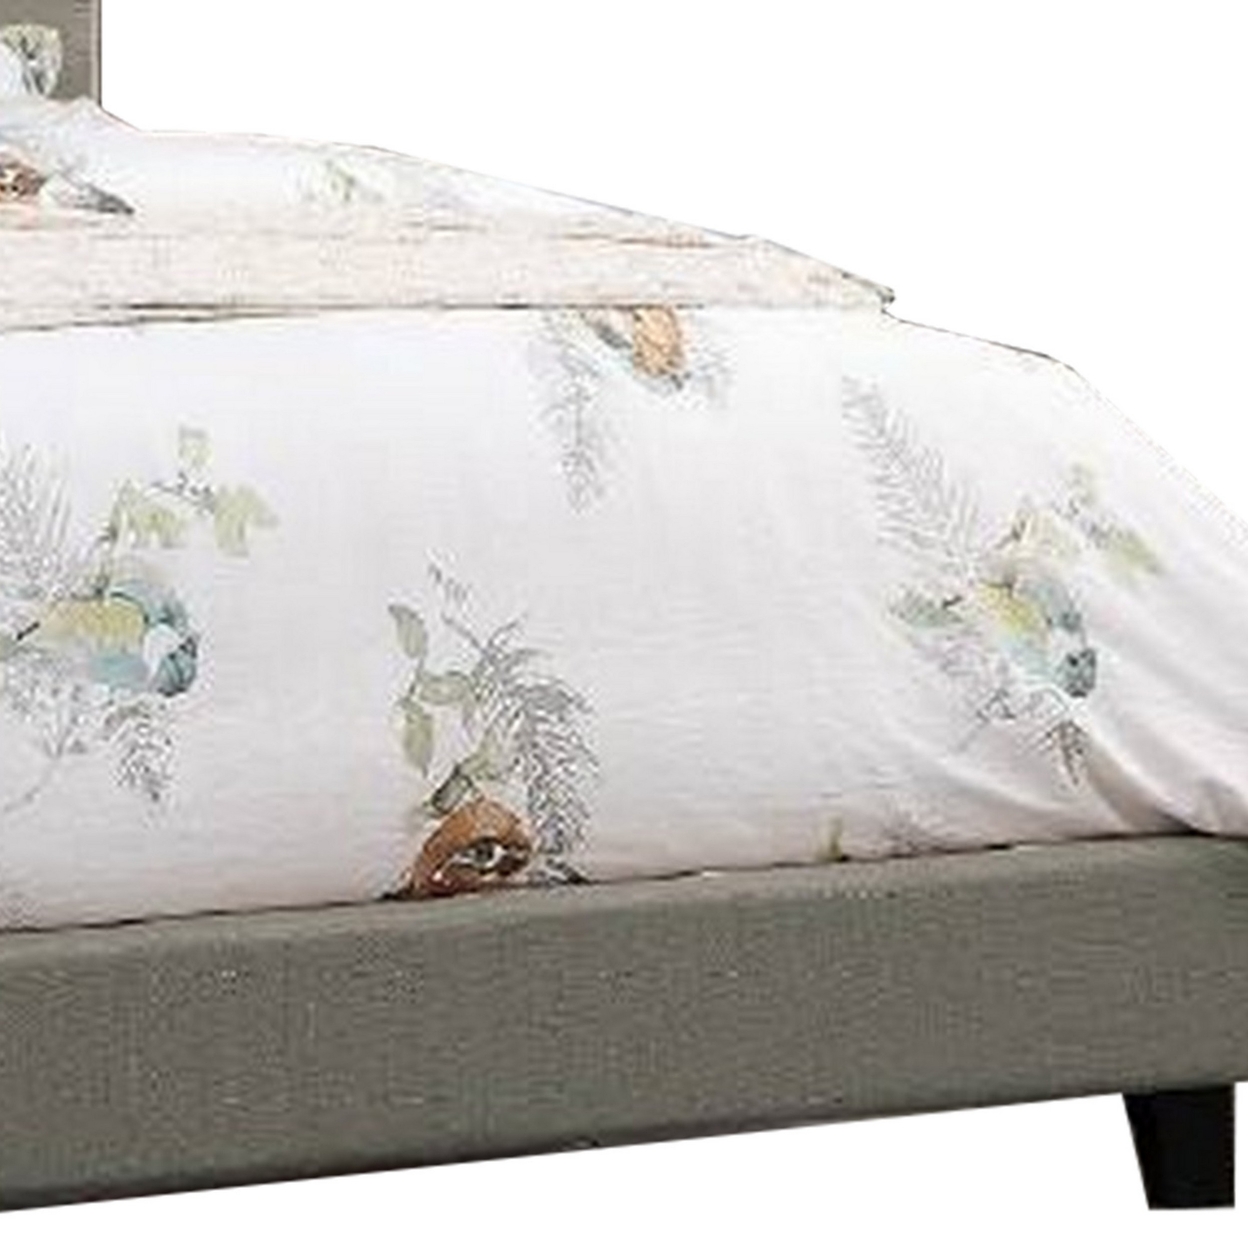 Eni Upholstered Queen Size Bed, Tufted Adjustable Headboard, Gray Fabric- Saltoro Sherpi